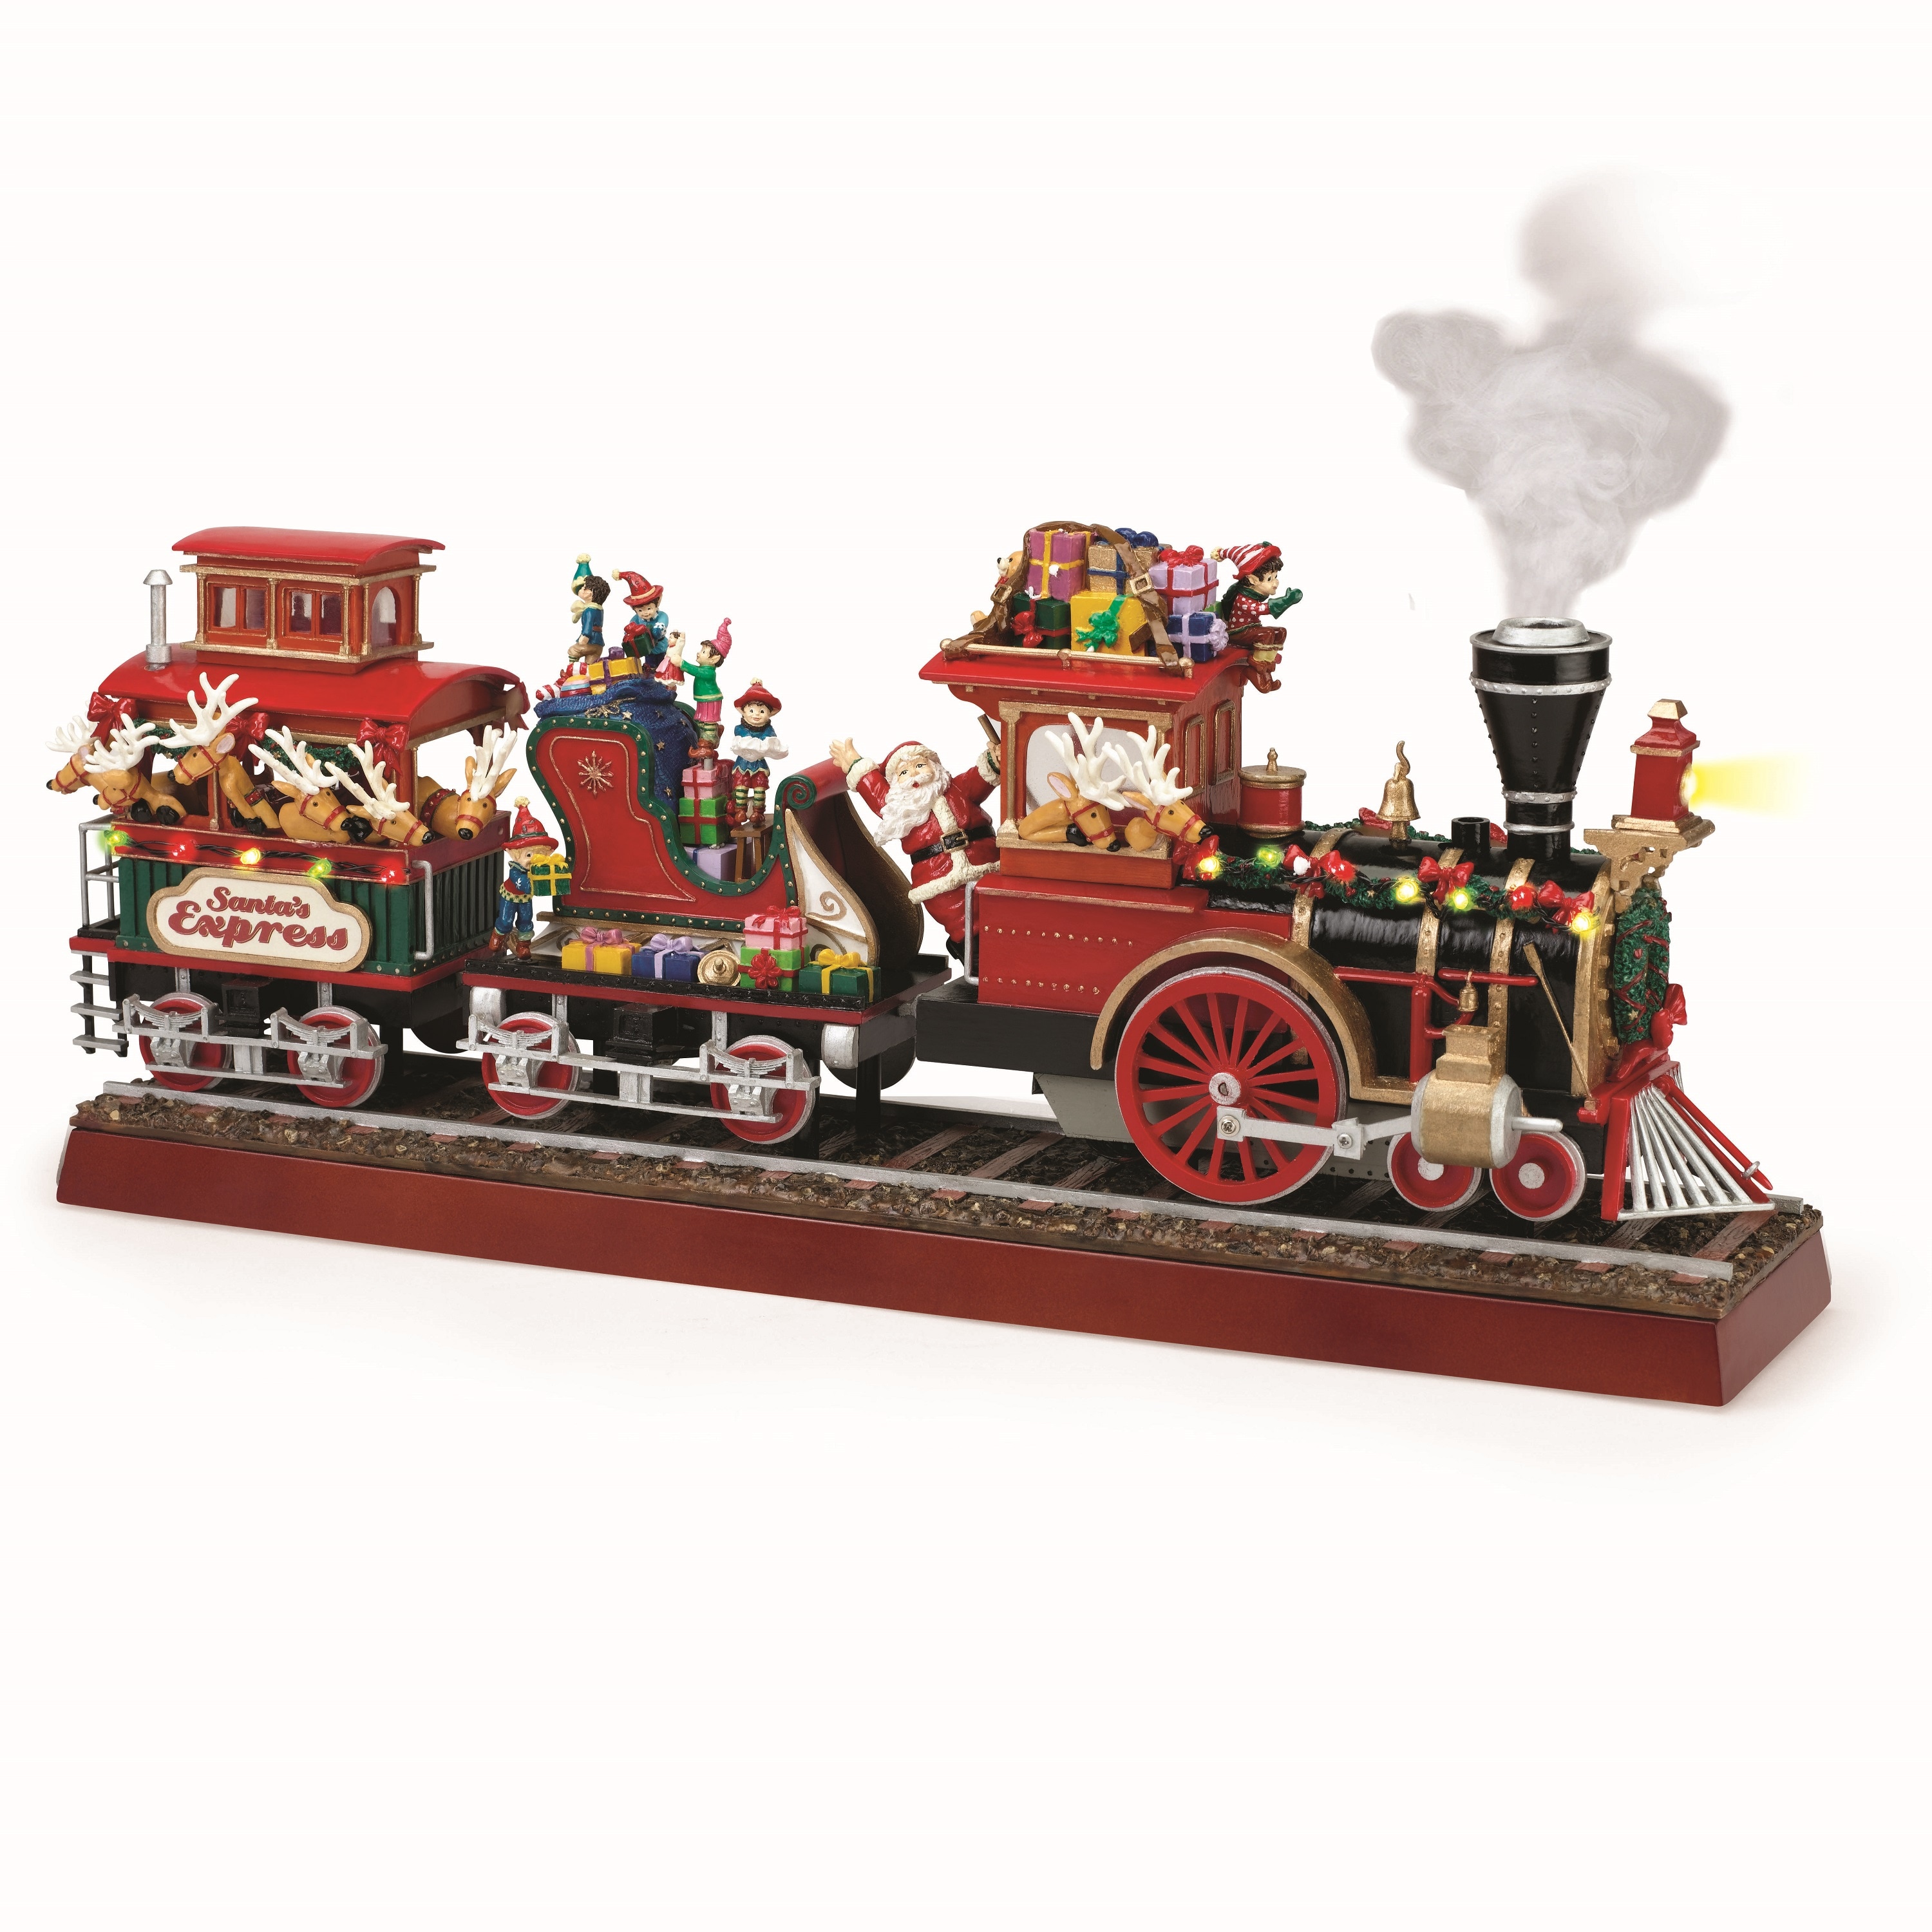 All aboard: 29% discount on these two LEGO train sets while stocks last